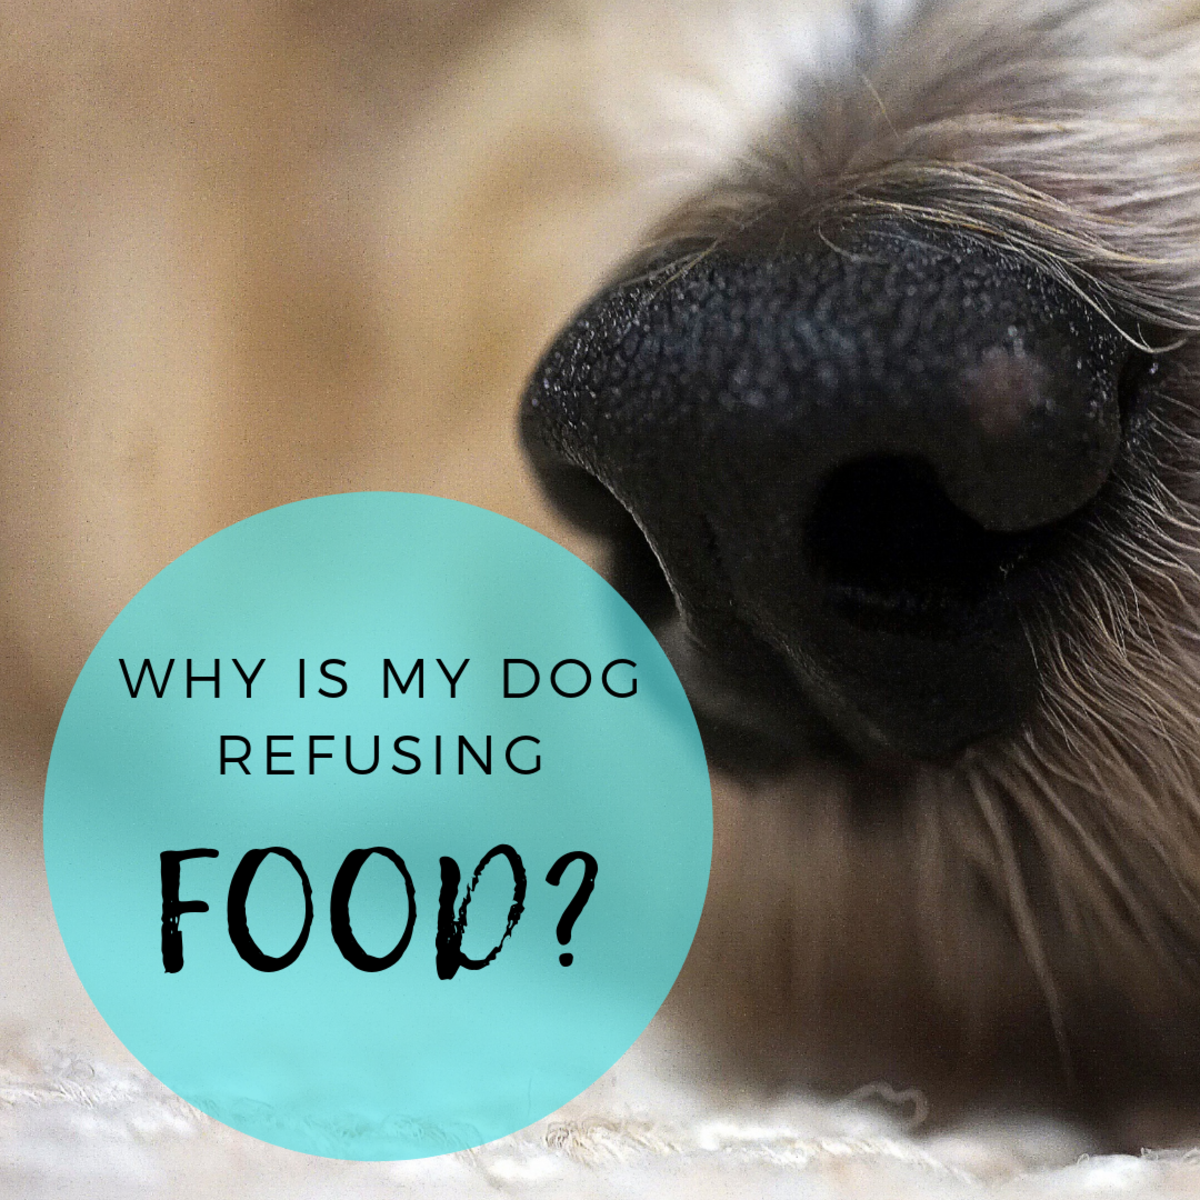 Is your dog still in love with his food?